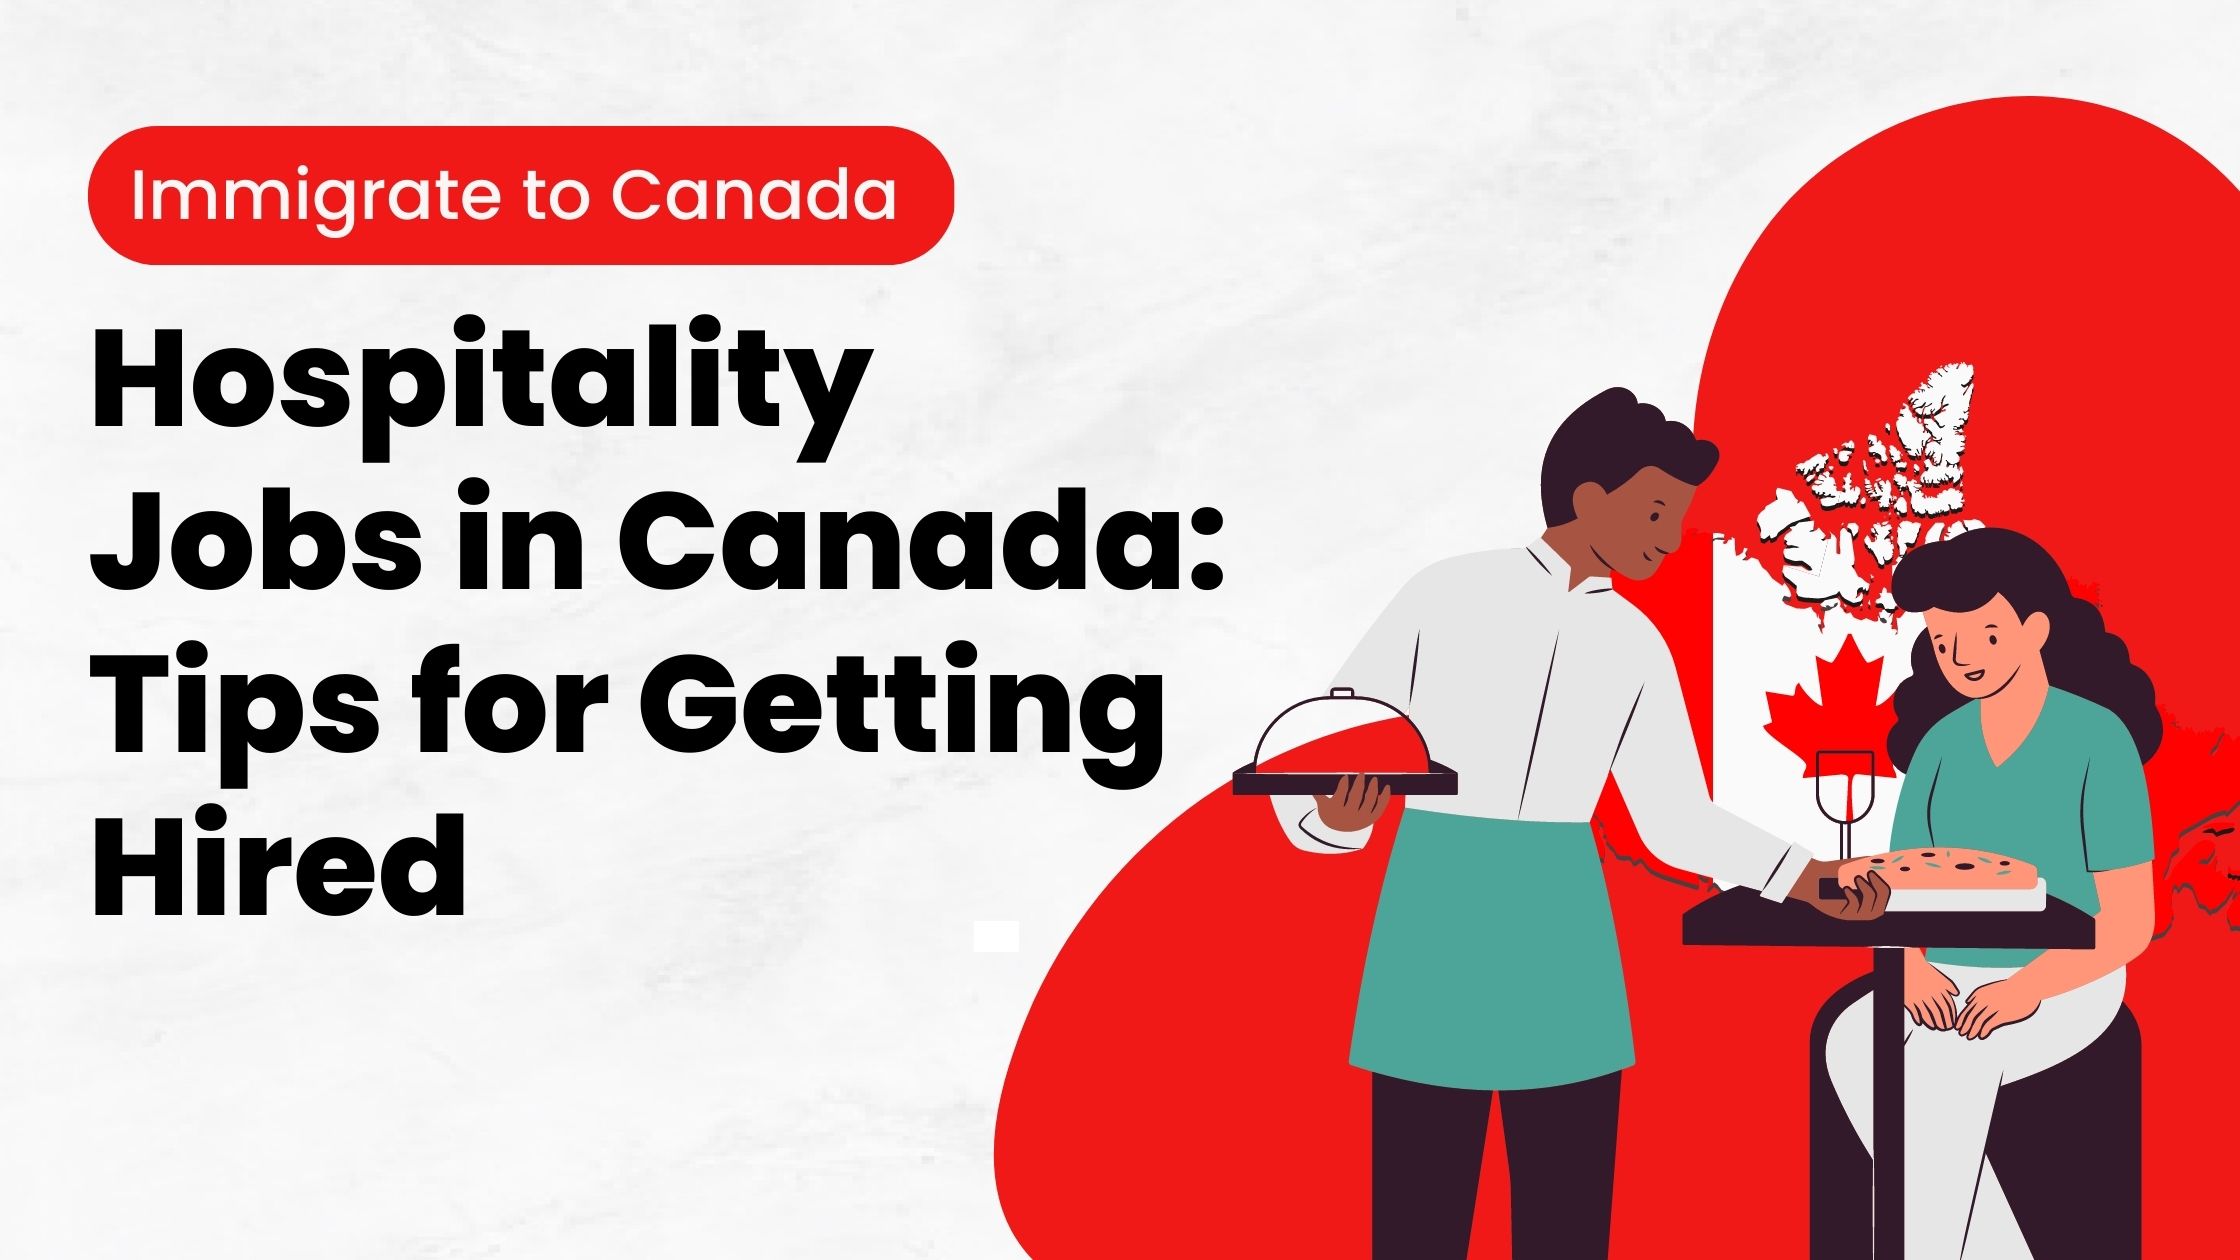 Tips for getting hospitality jobs in Canada